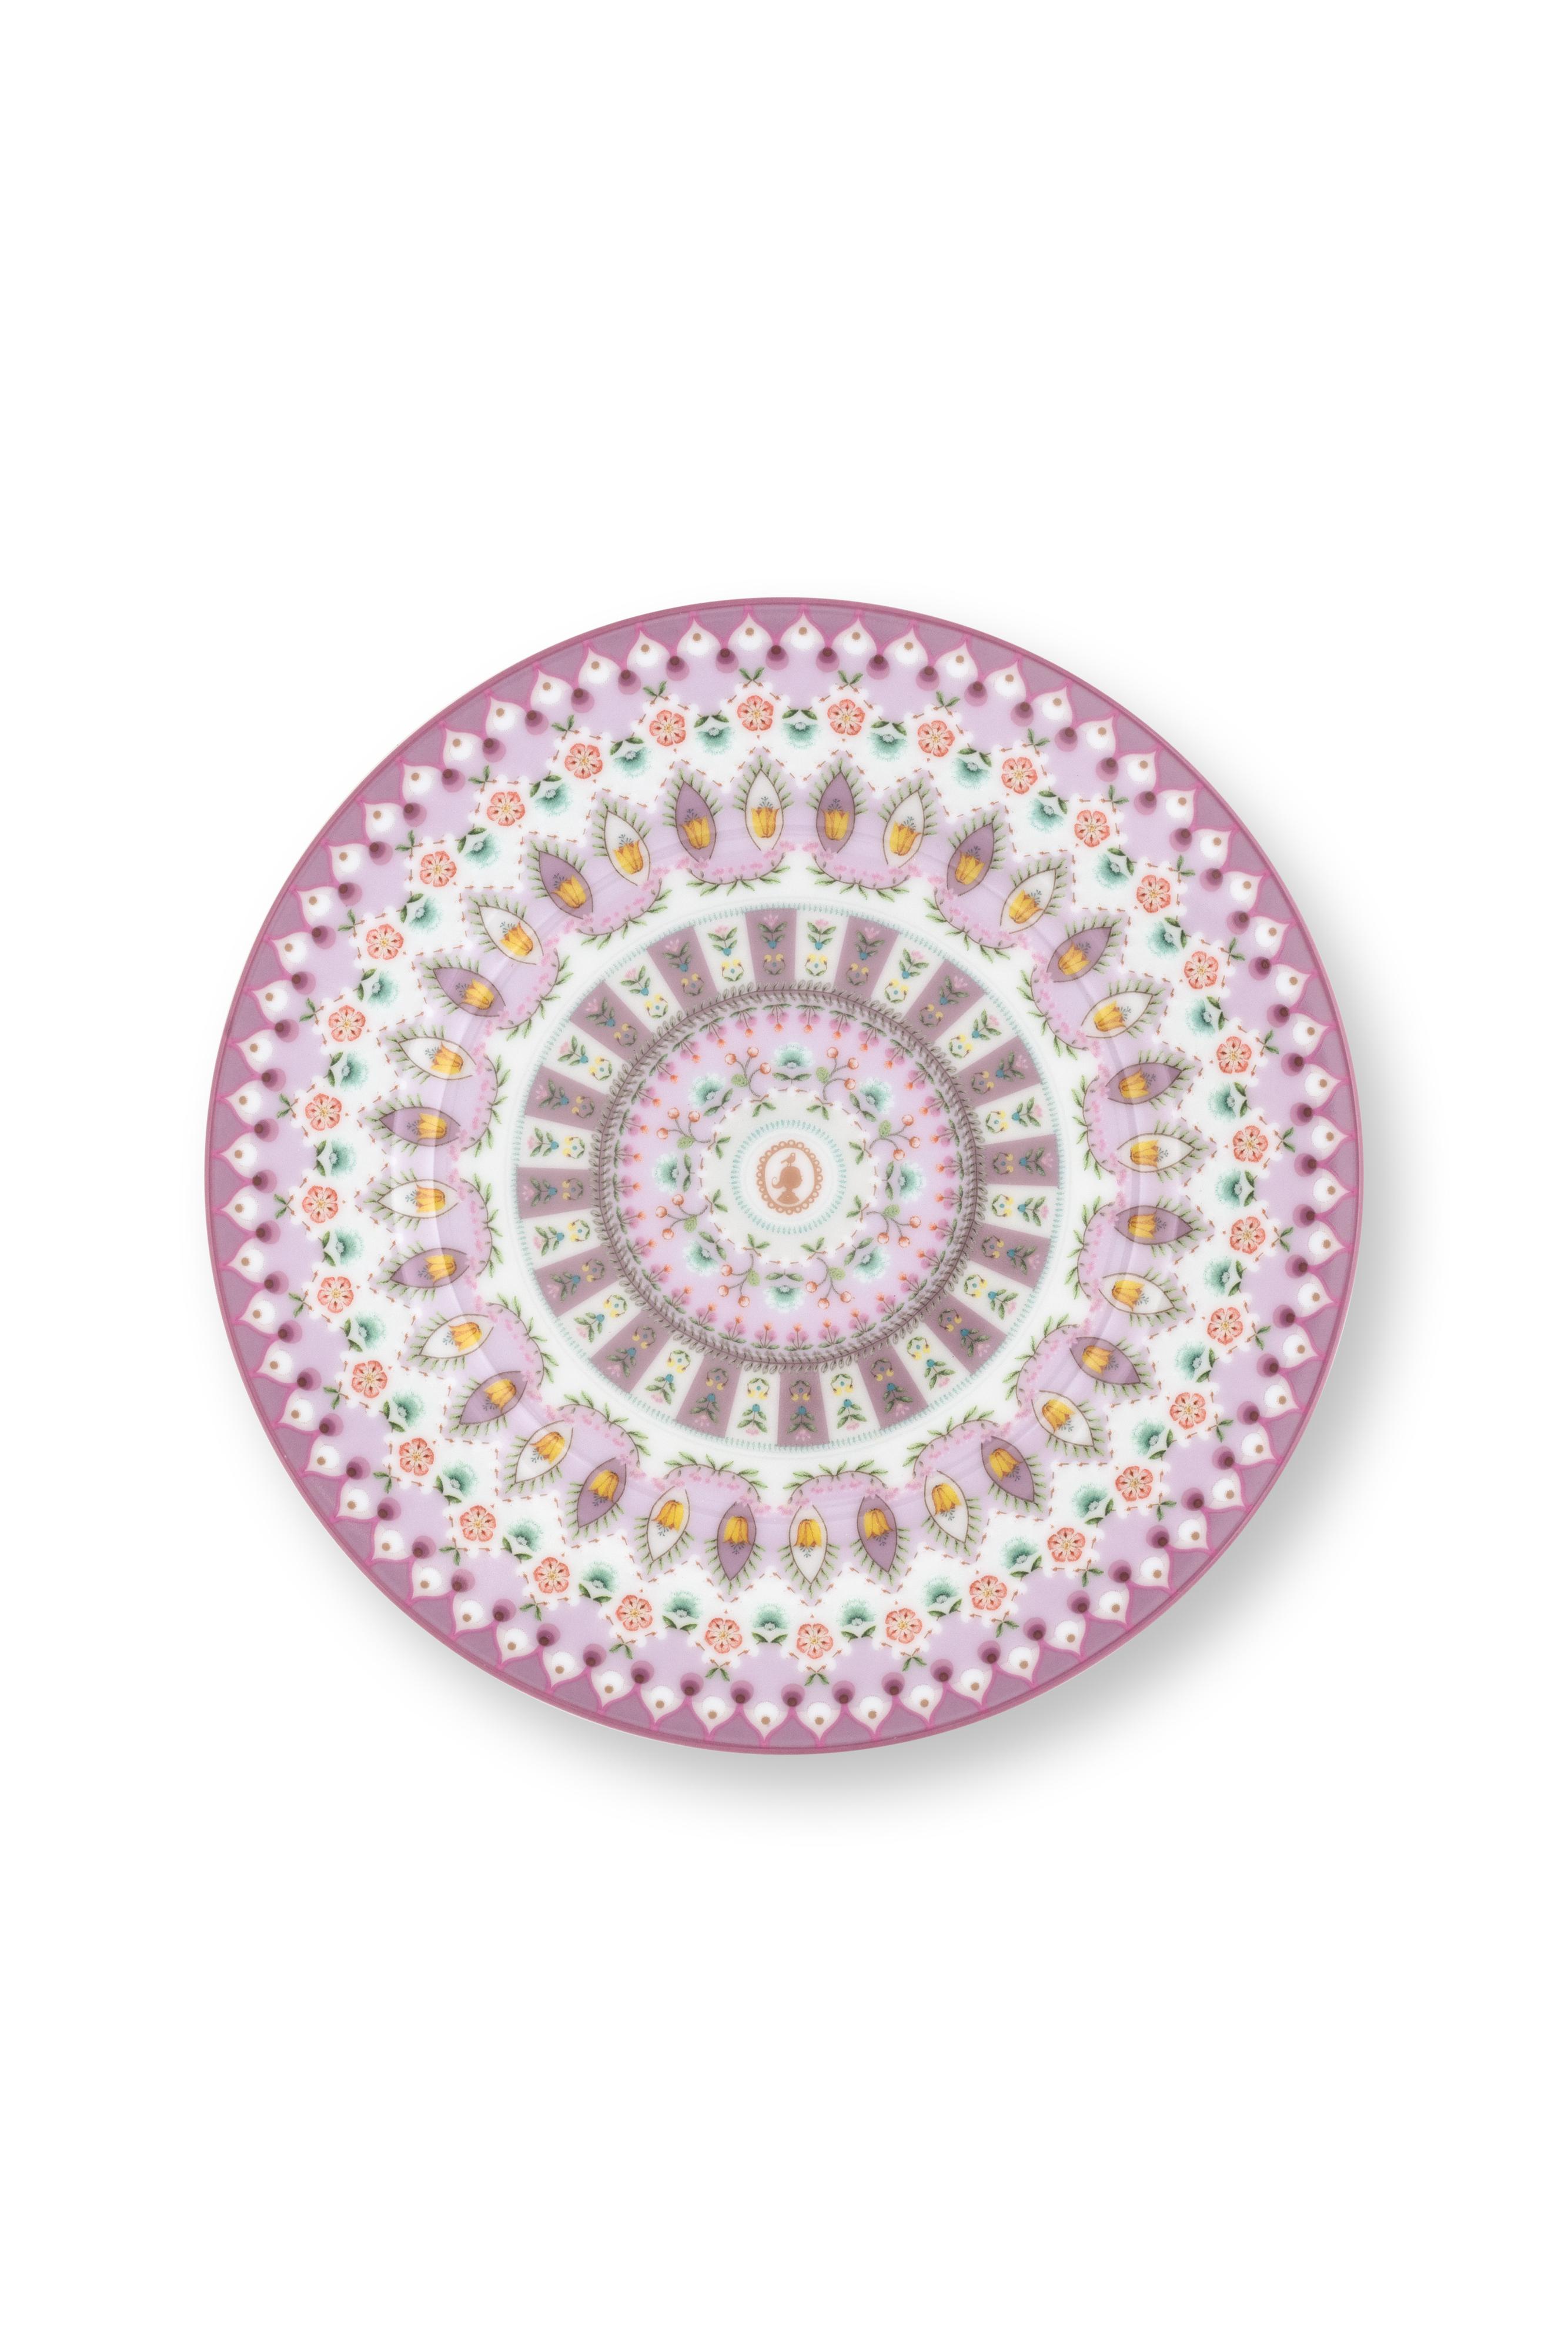 Plate Lily-lotus Moon Delight Multi 17cm Gift